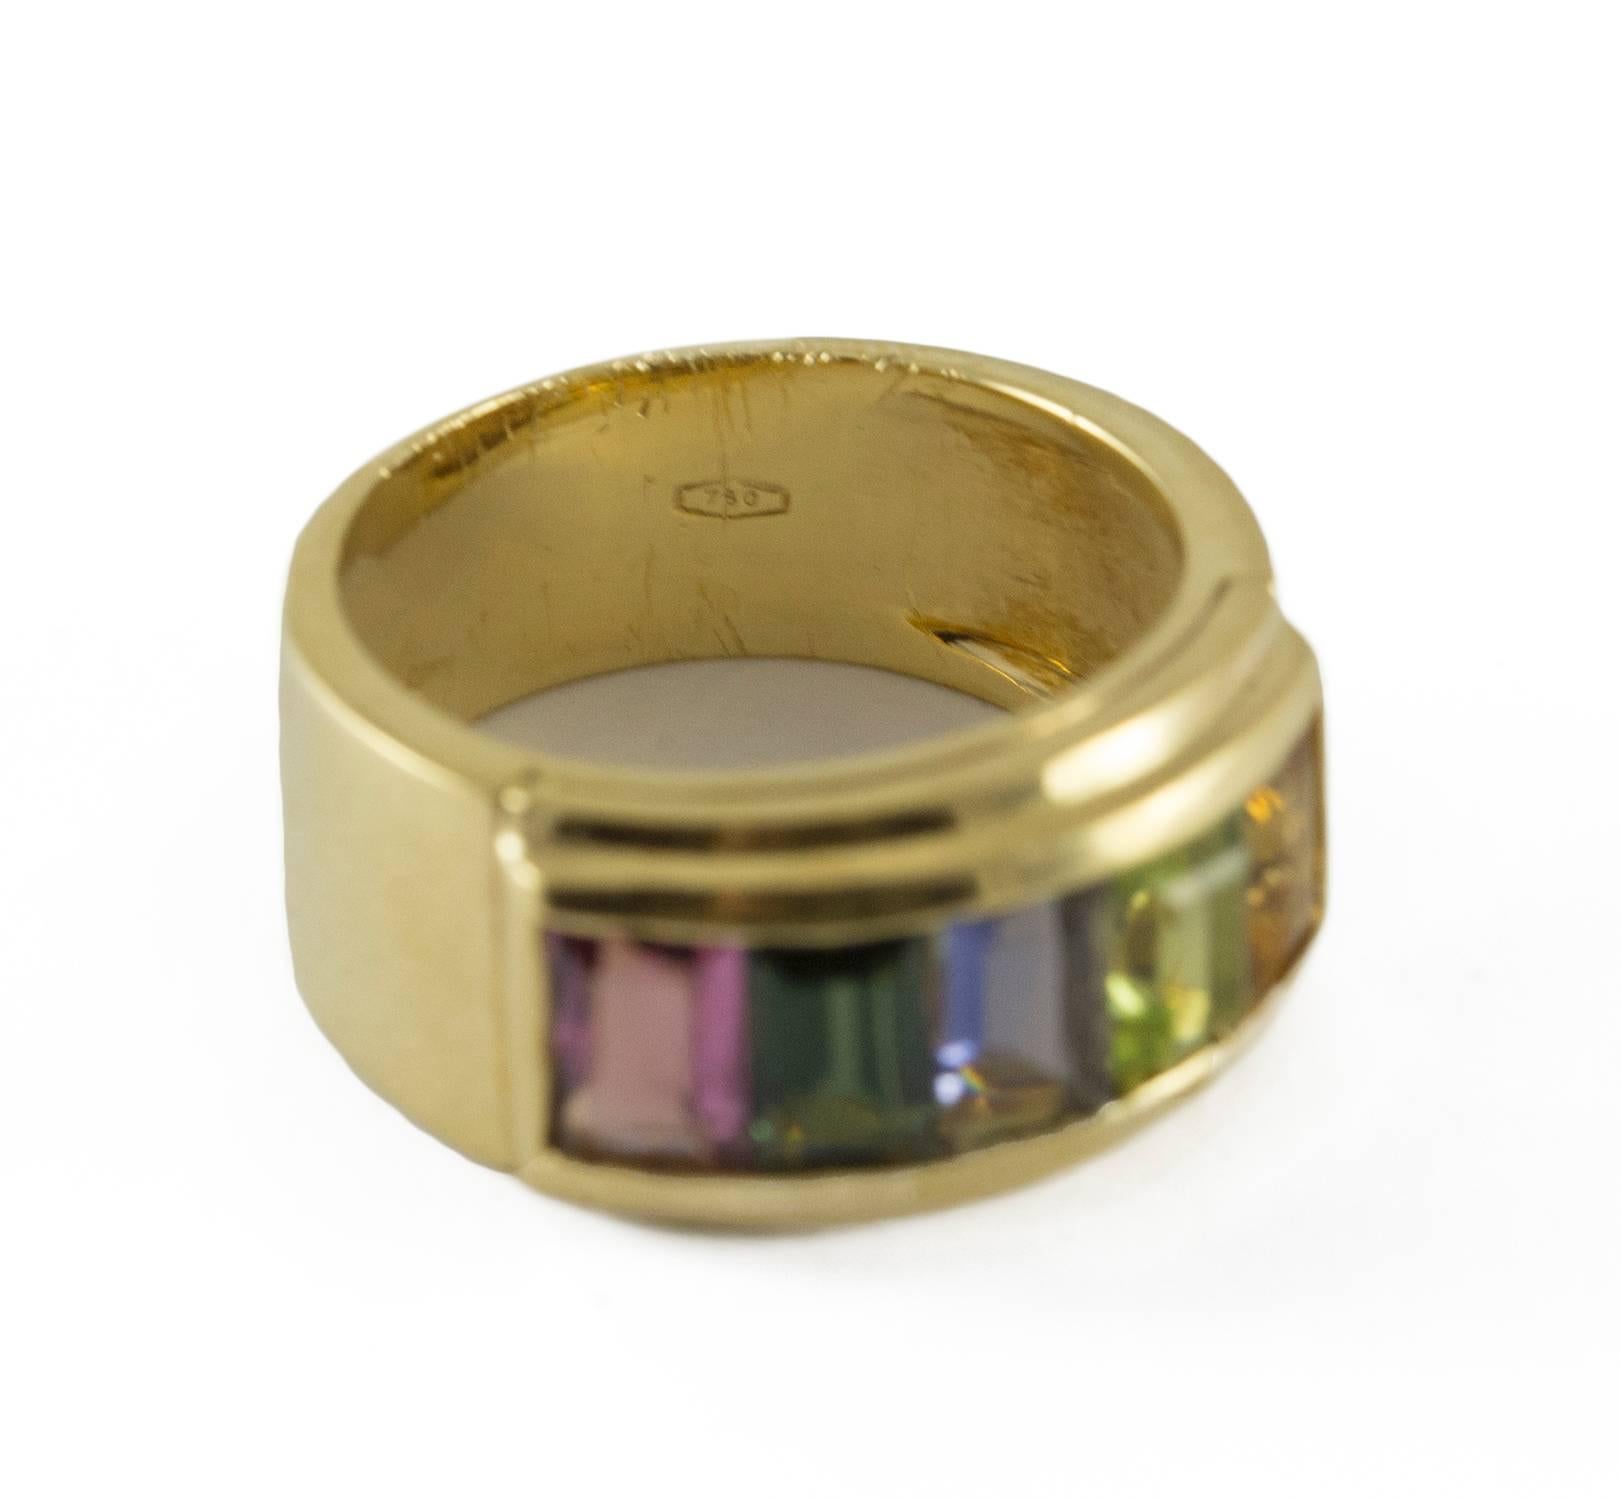 A delightful gemstone band ring set in 18k yellow gold. This ring holds bright luminous semi precious stones -  Pink Tourmaline, Green Tourmaline, Iolite, Peridot and Citrine. They are channel set and framed by yellow gold. The ring measures size